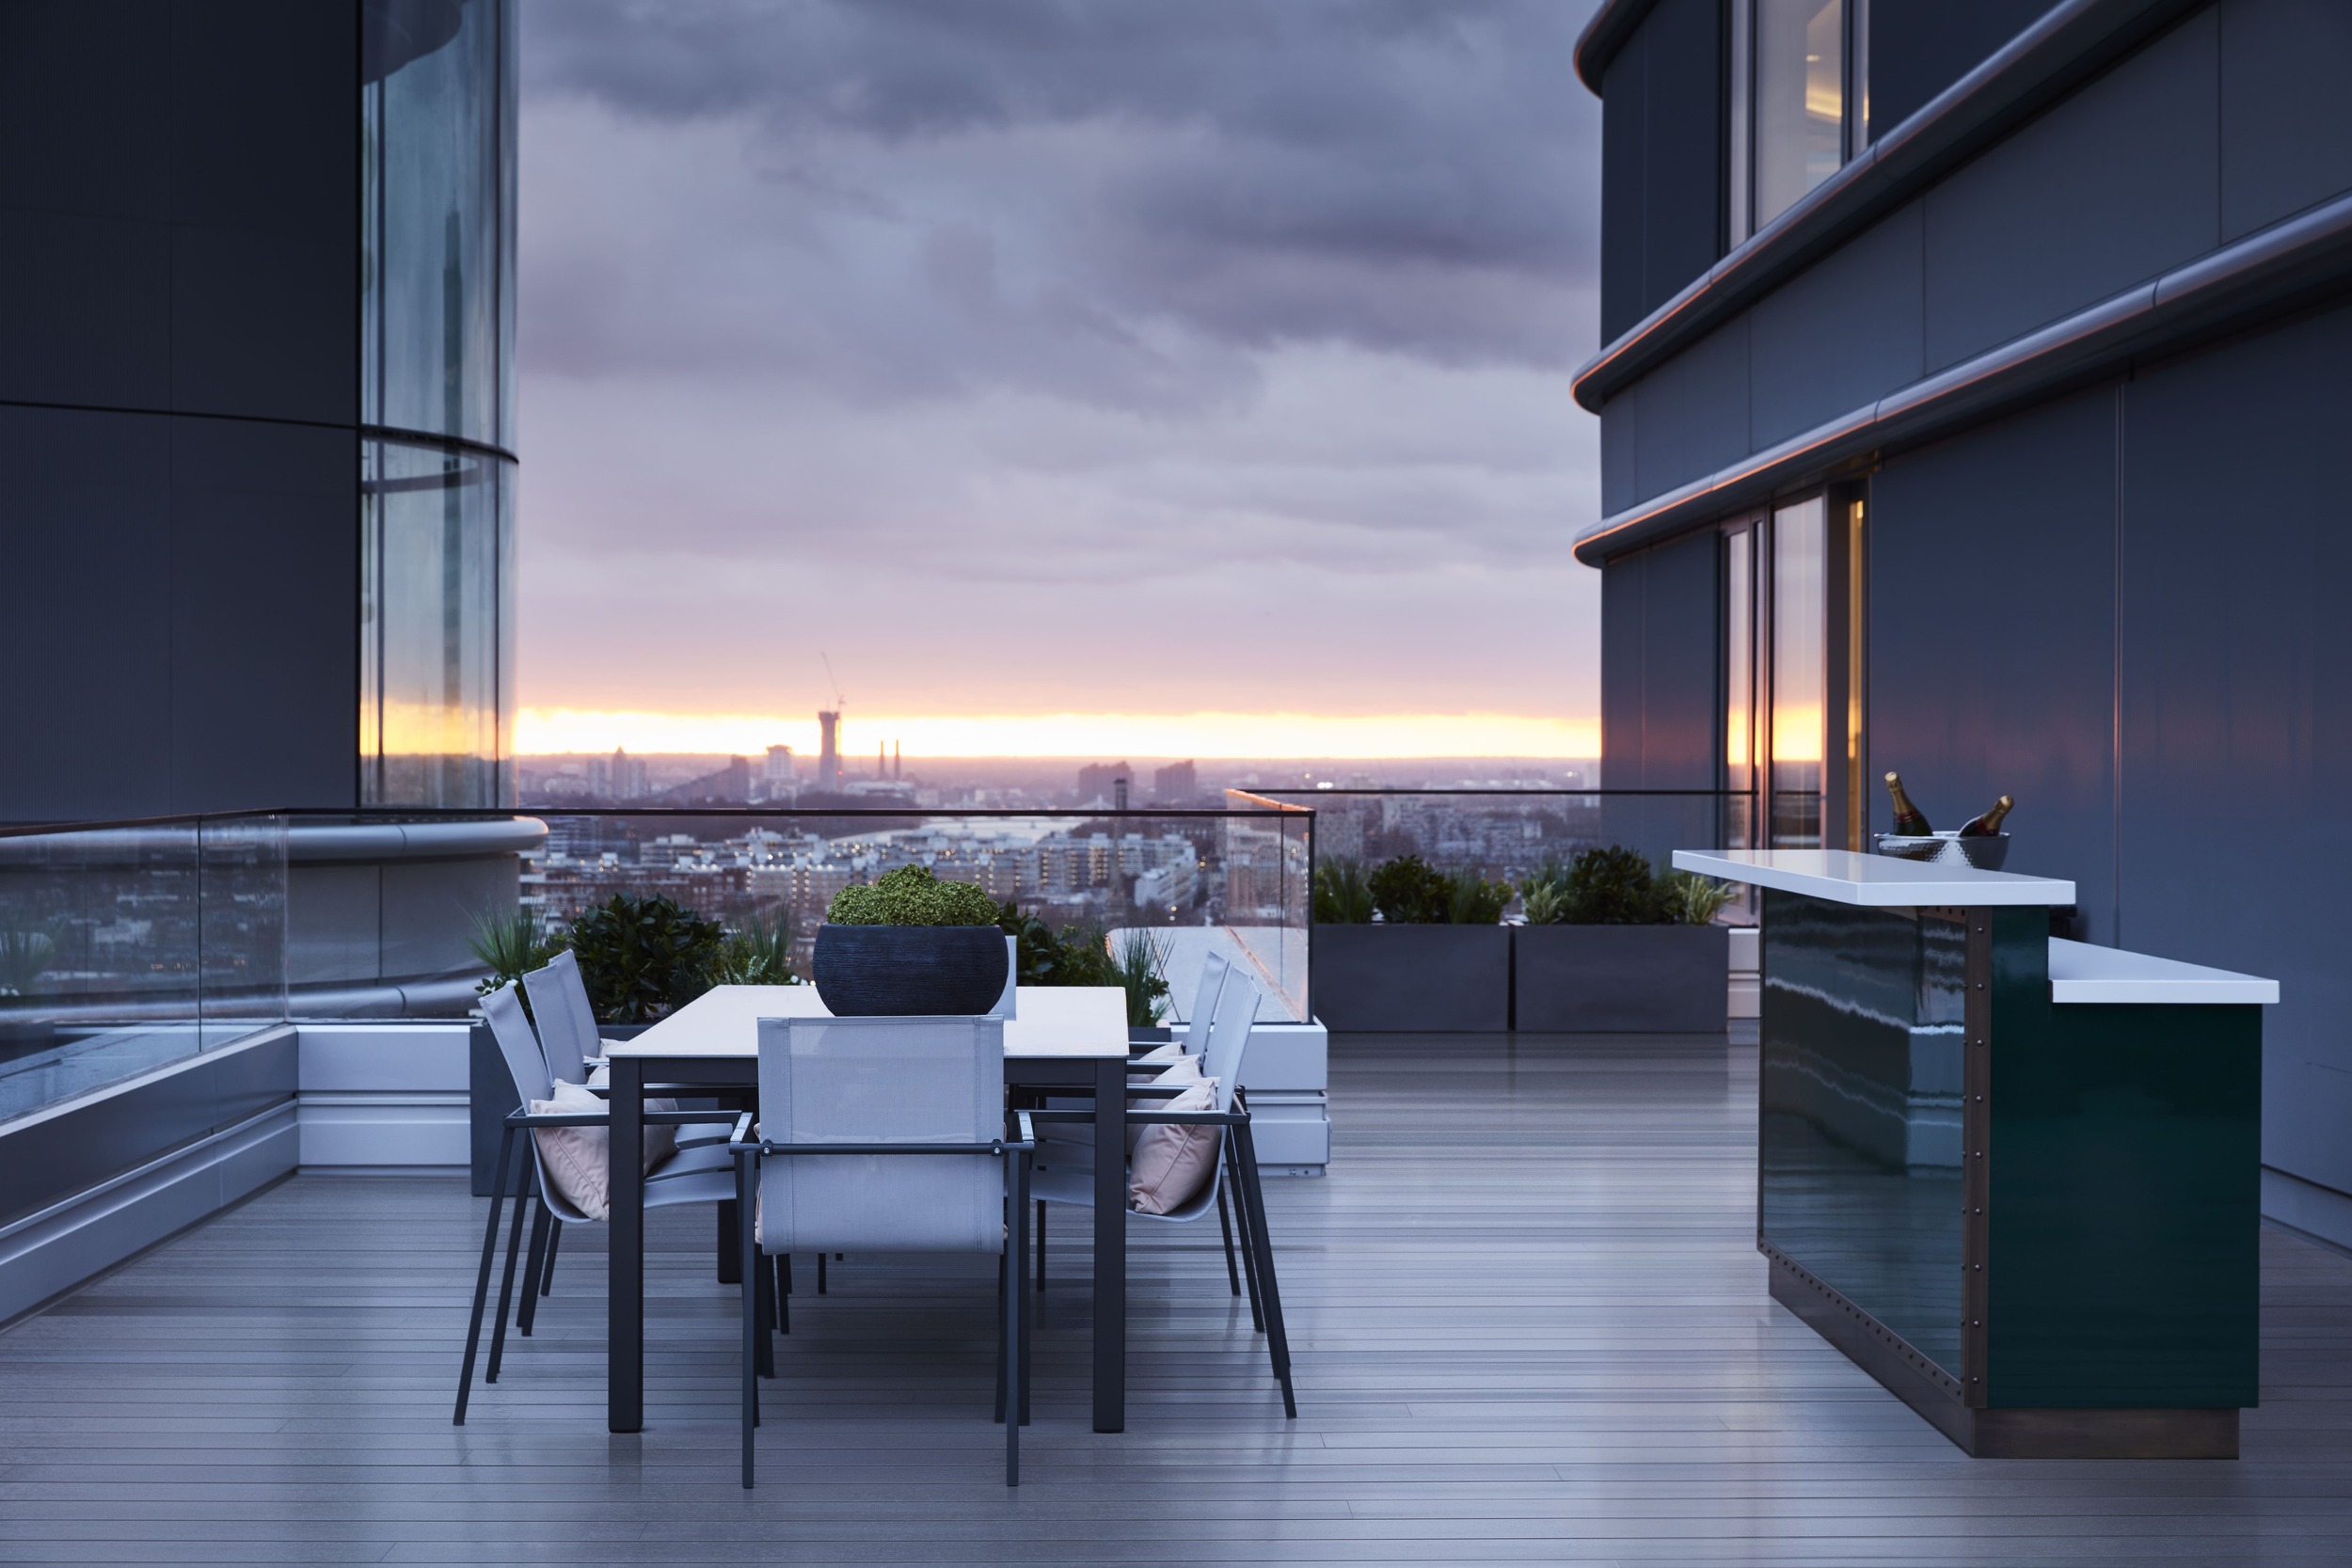 London space: Rooftop family dining area